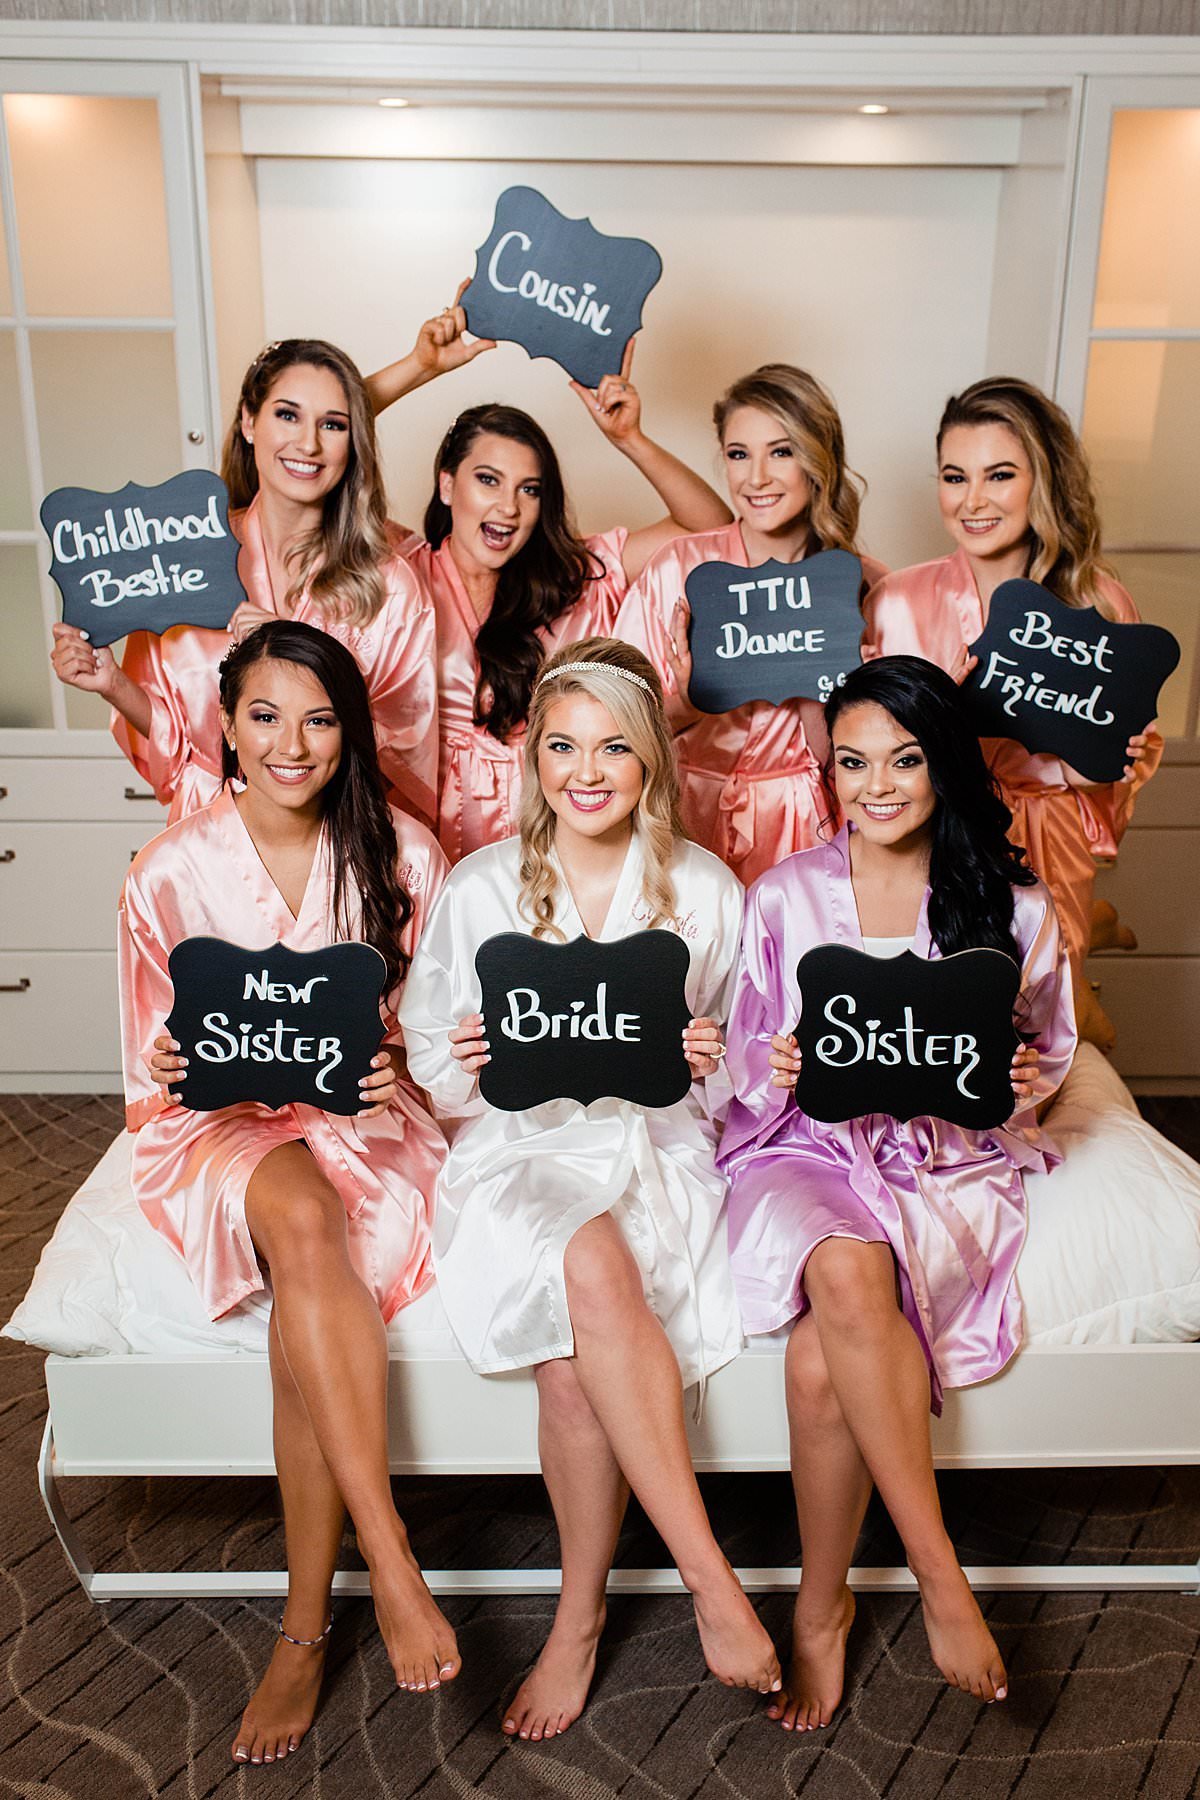 Bridesmaids holding signs showing how they know the bride while wearing robes